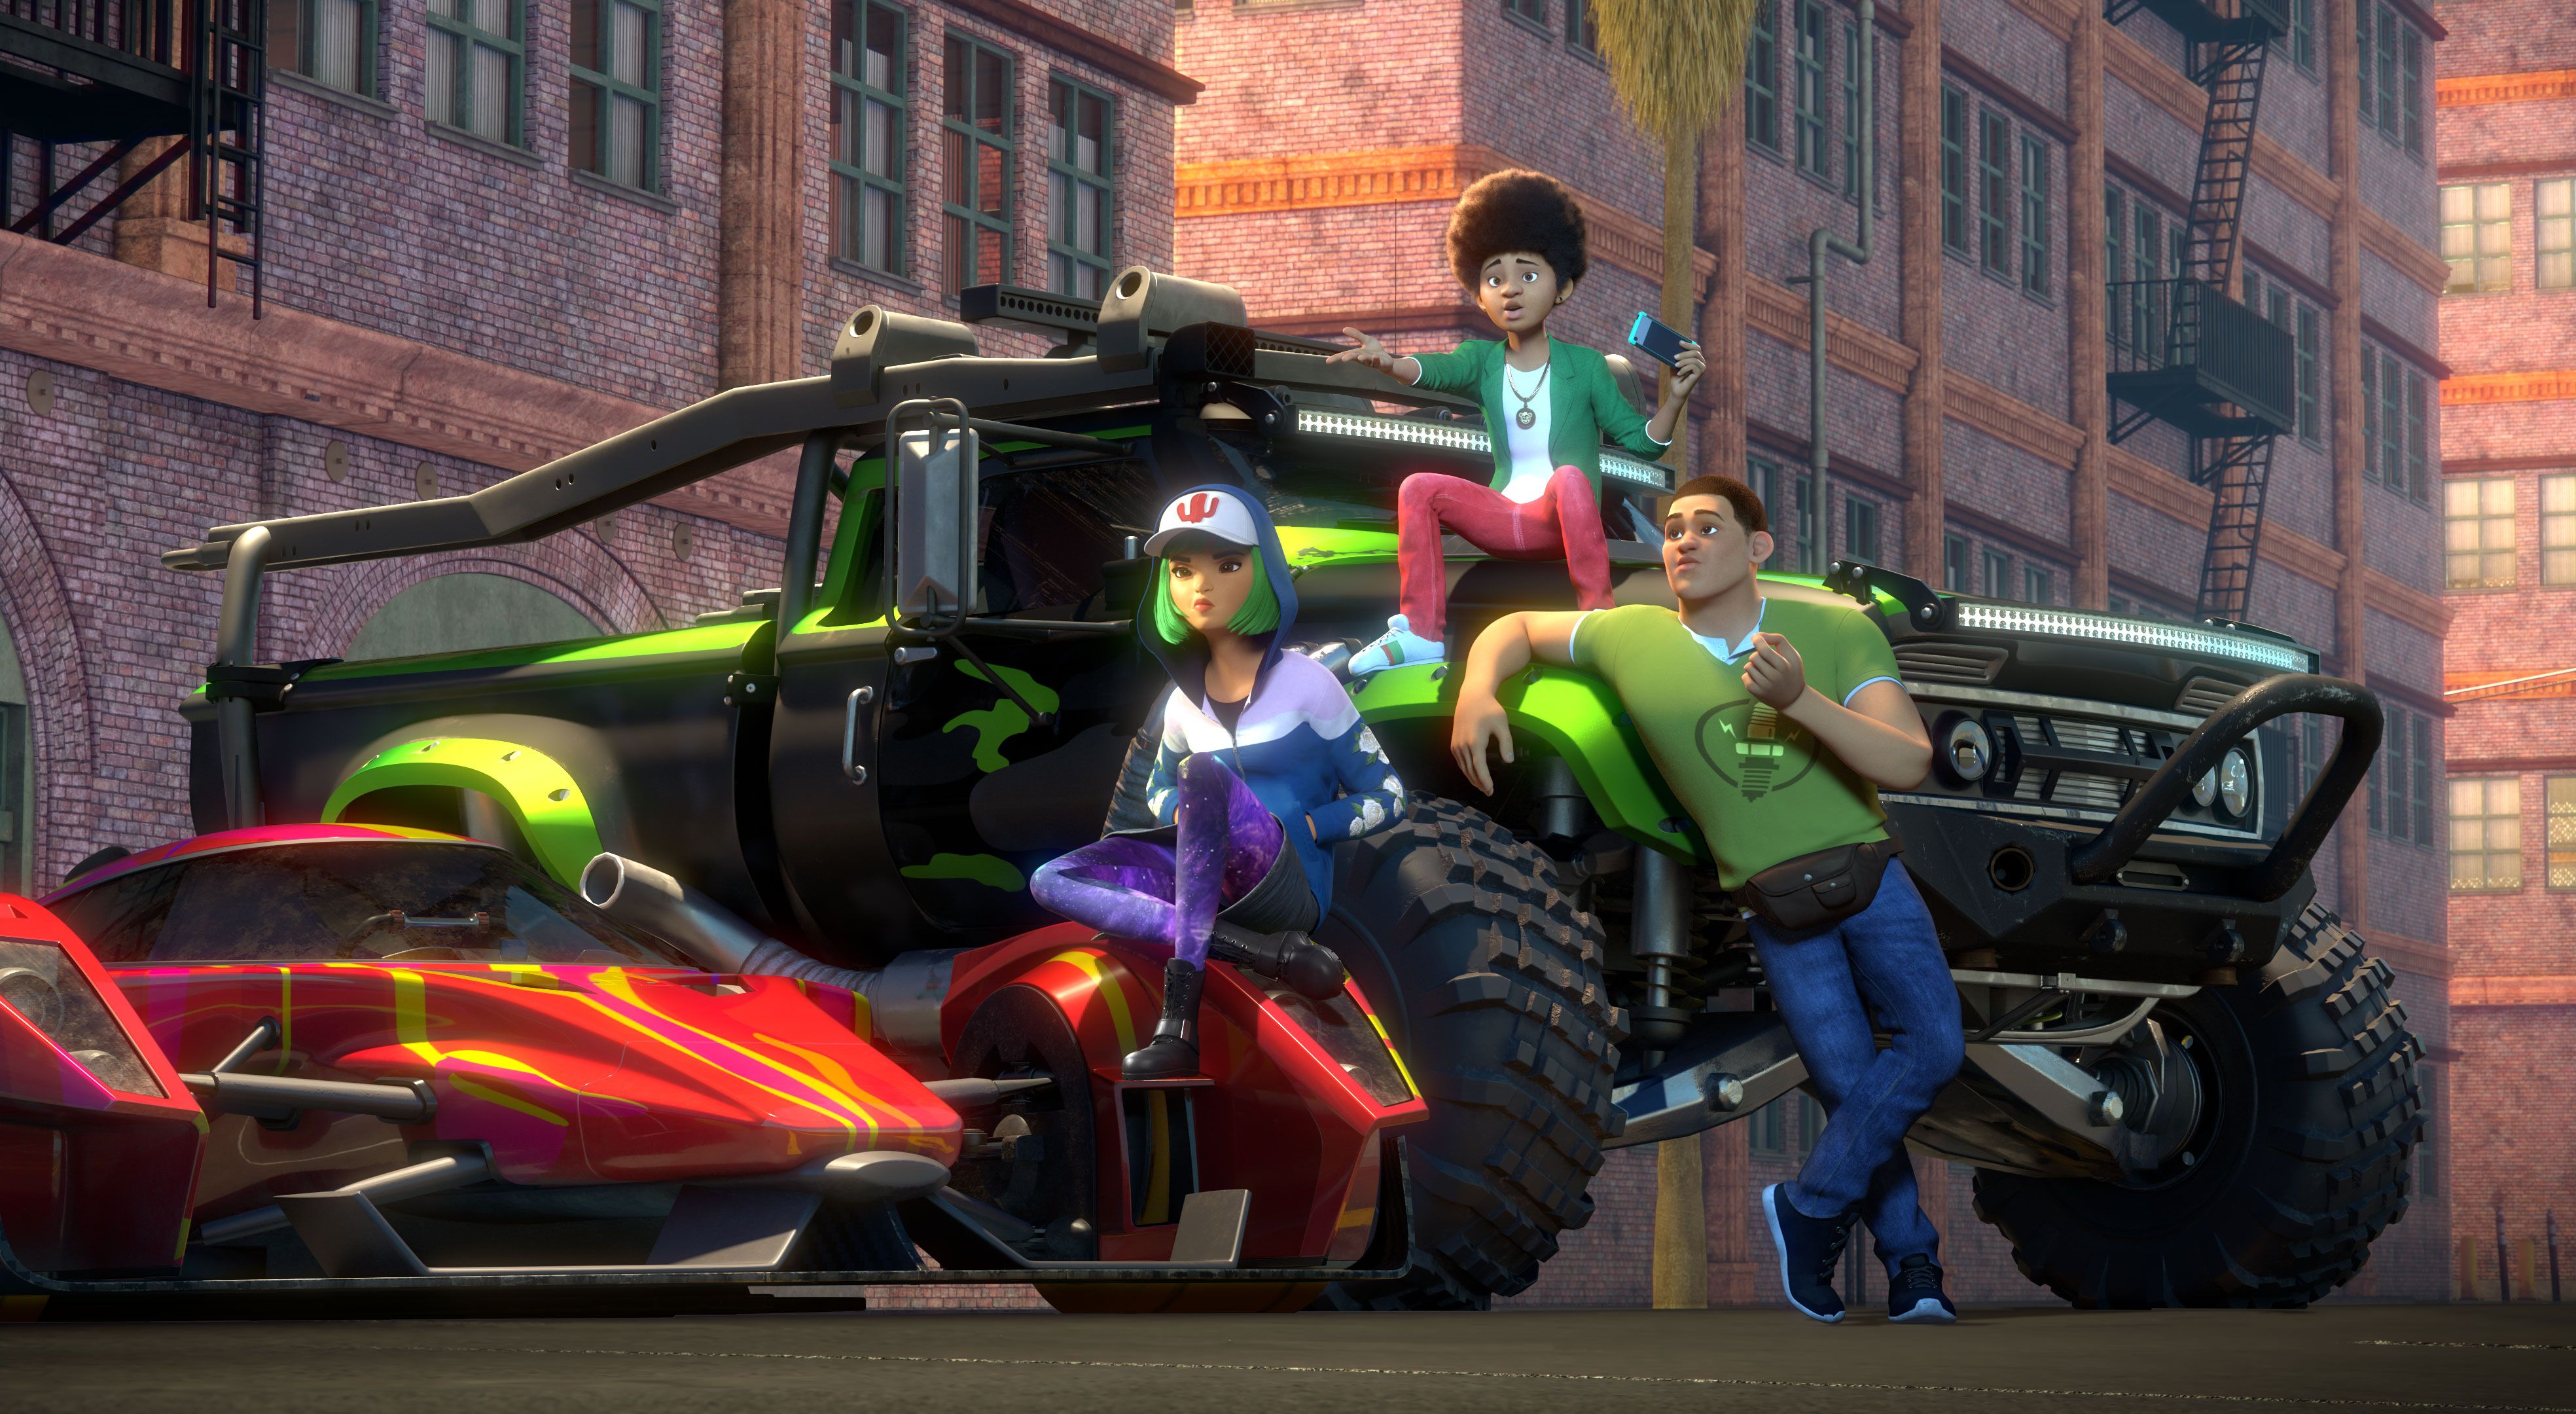 Fast and Furious Spy Racers Cast, Release Dates, and Image.